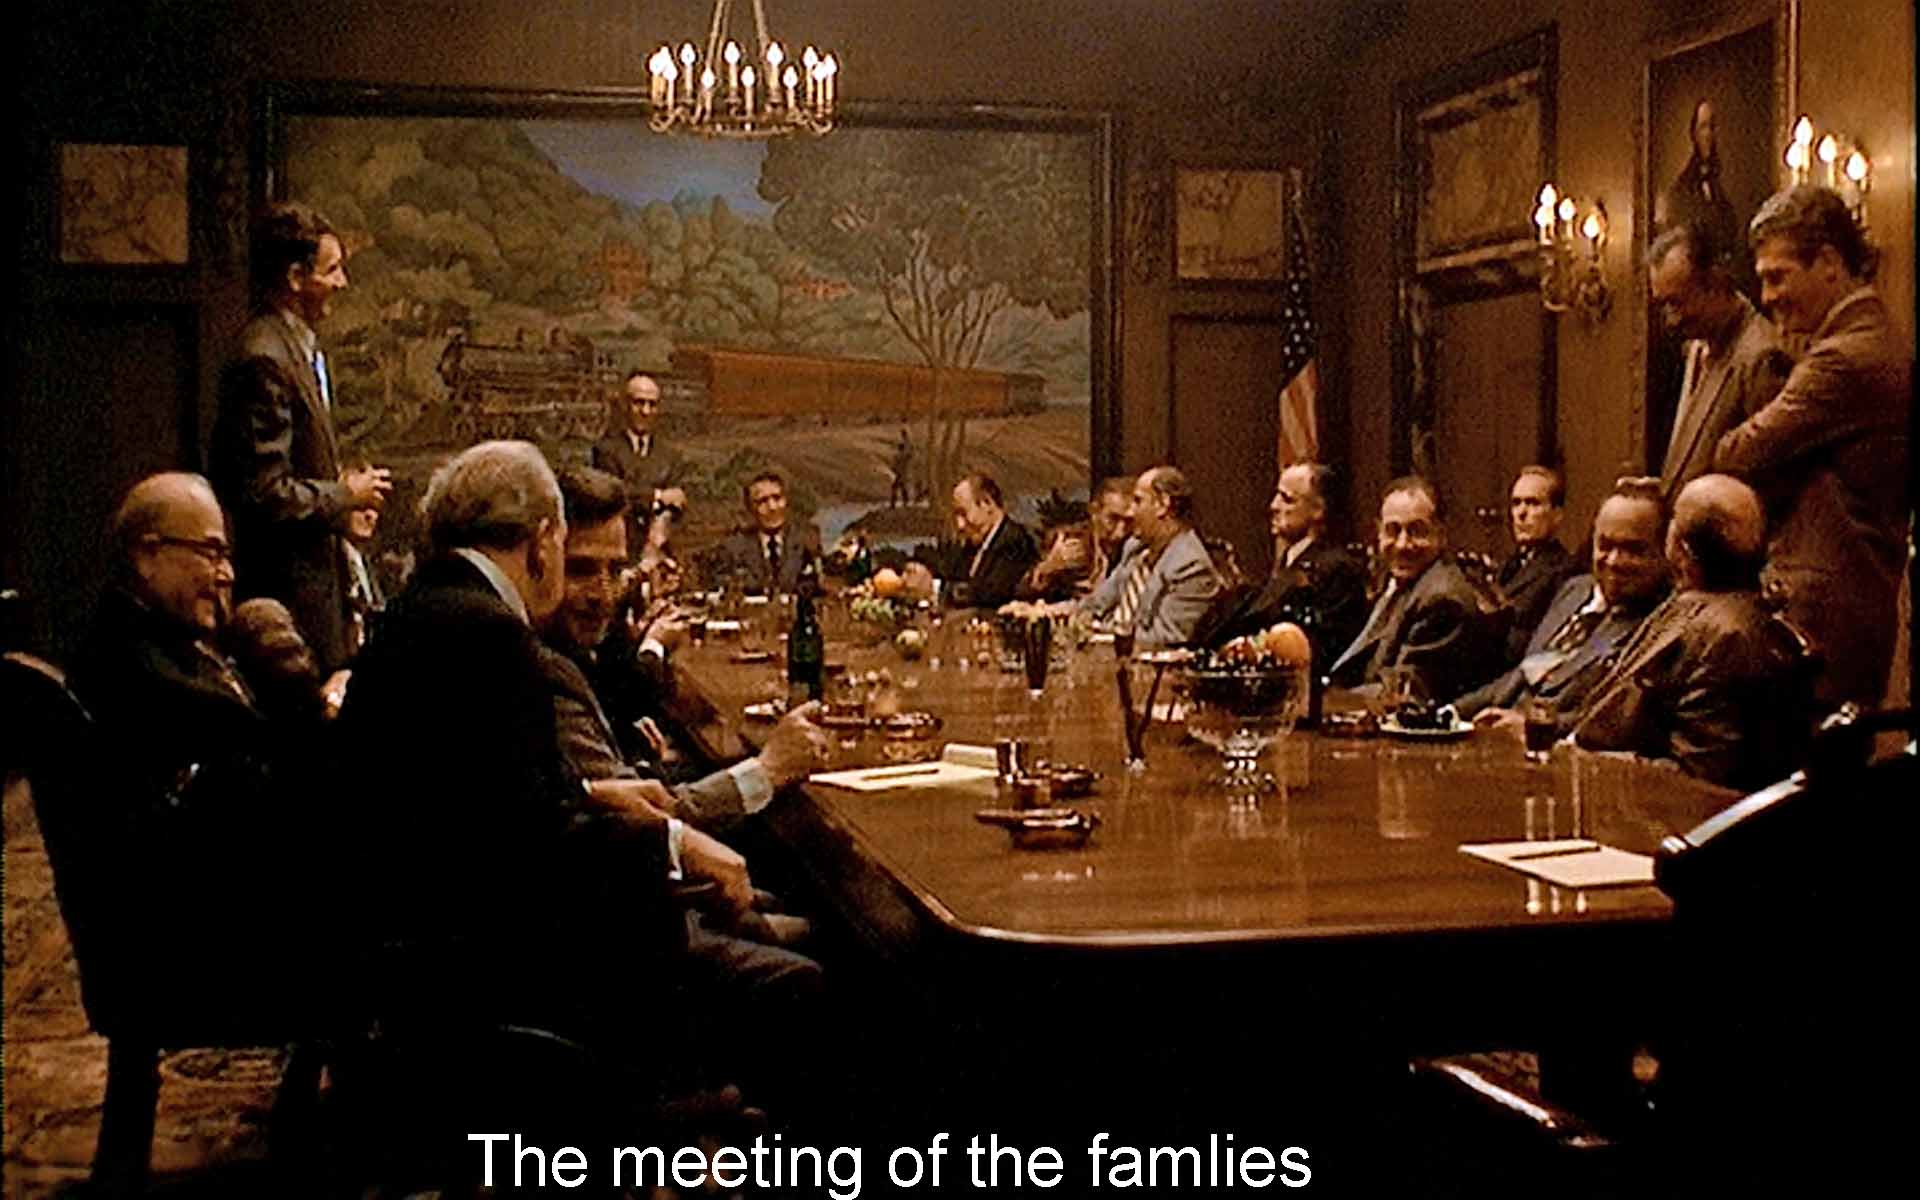 The meeting of the families